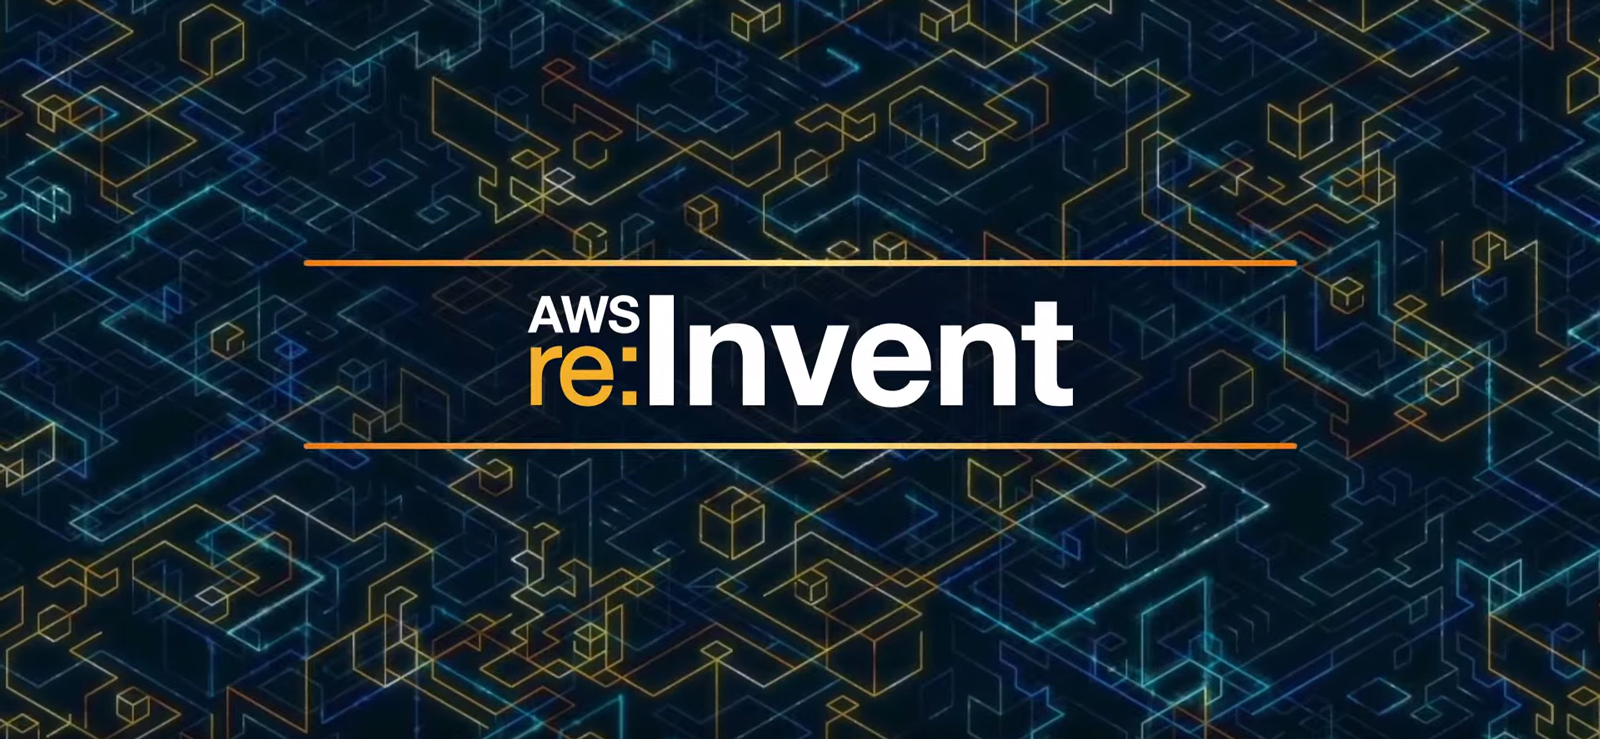 AWS re:Invent 2015 welcome event. Image by: Amazon Web Services